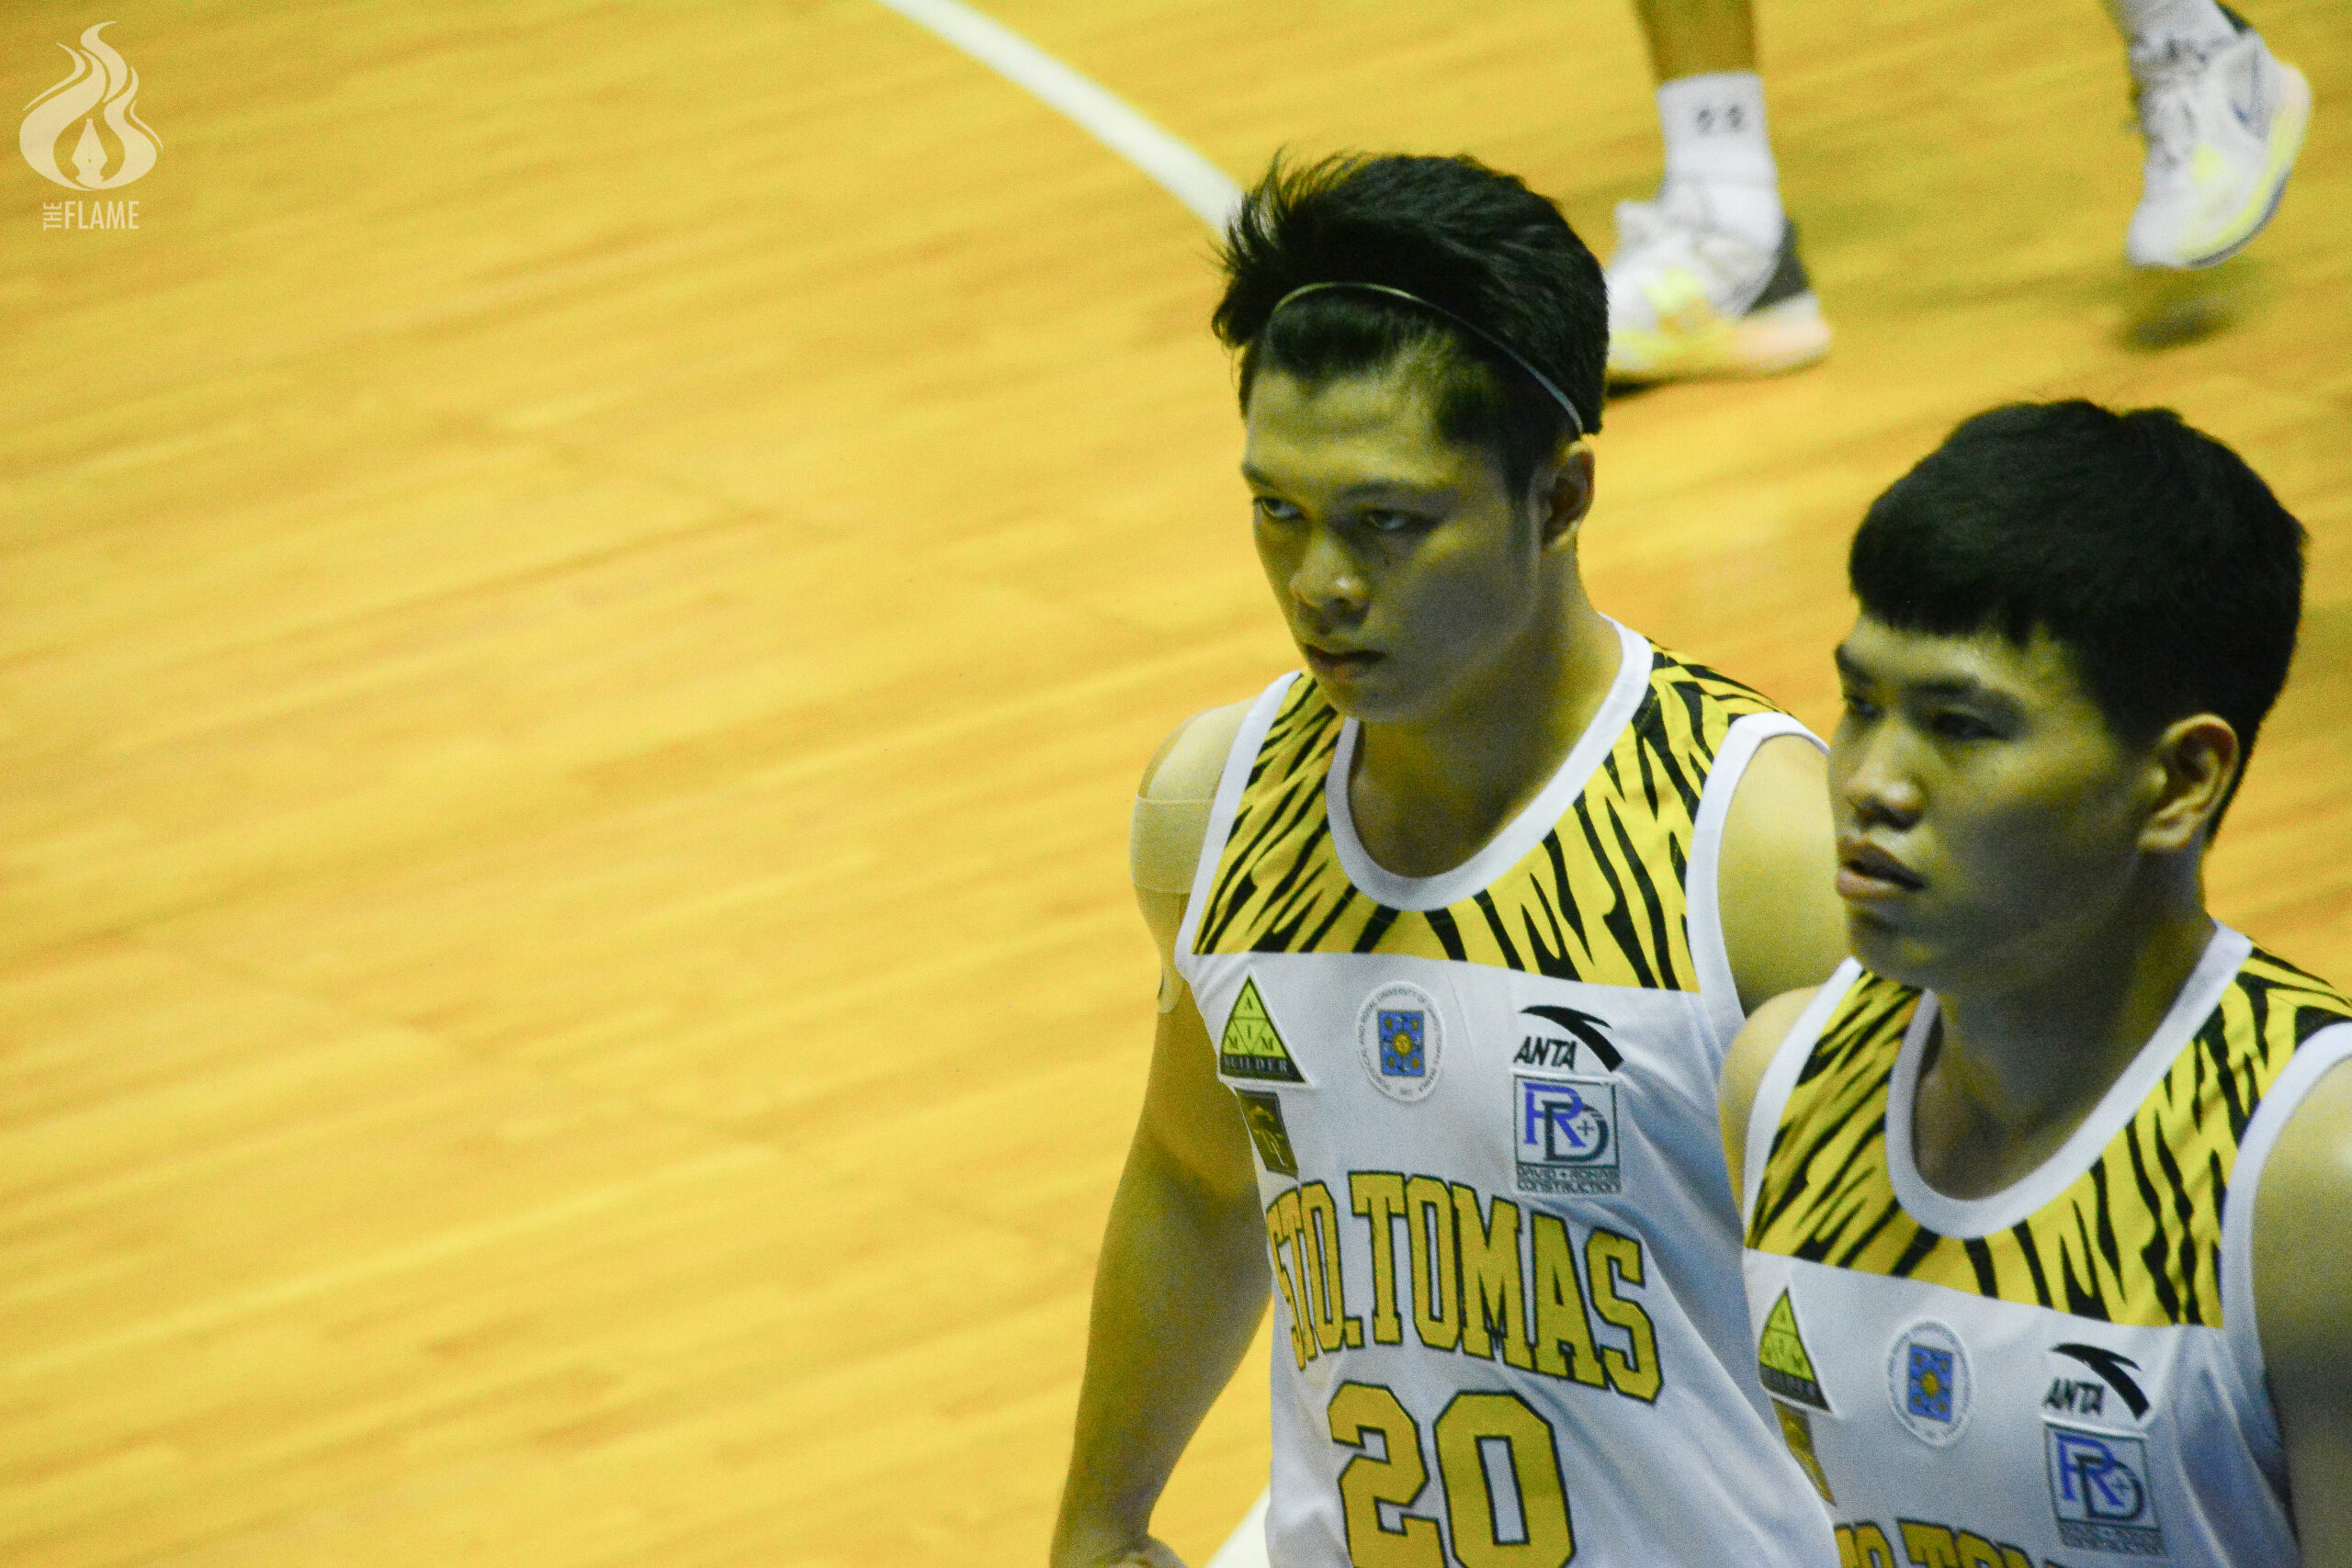 No repeat of day one win as UST falls to AdU